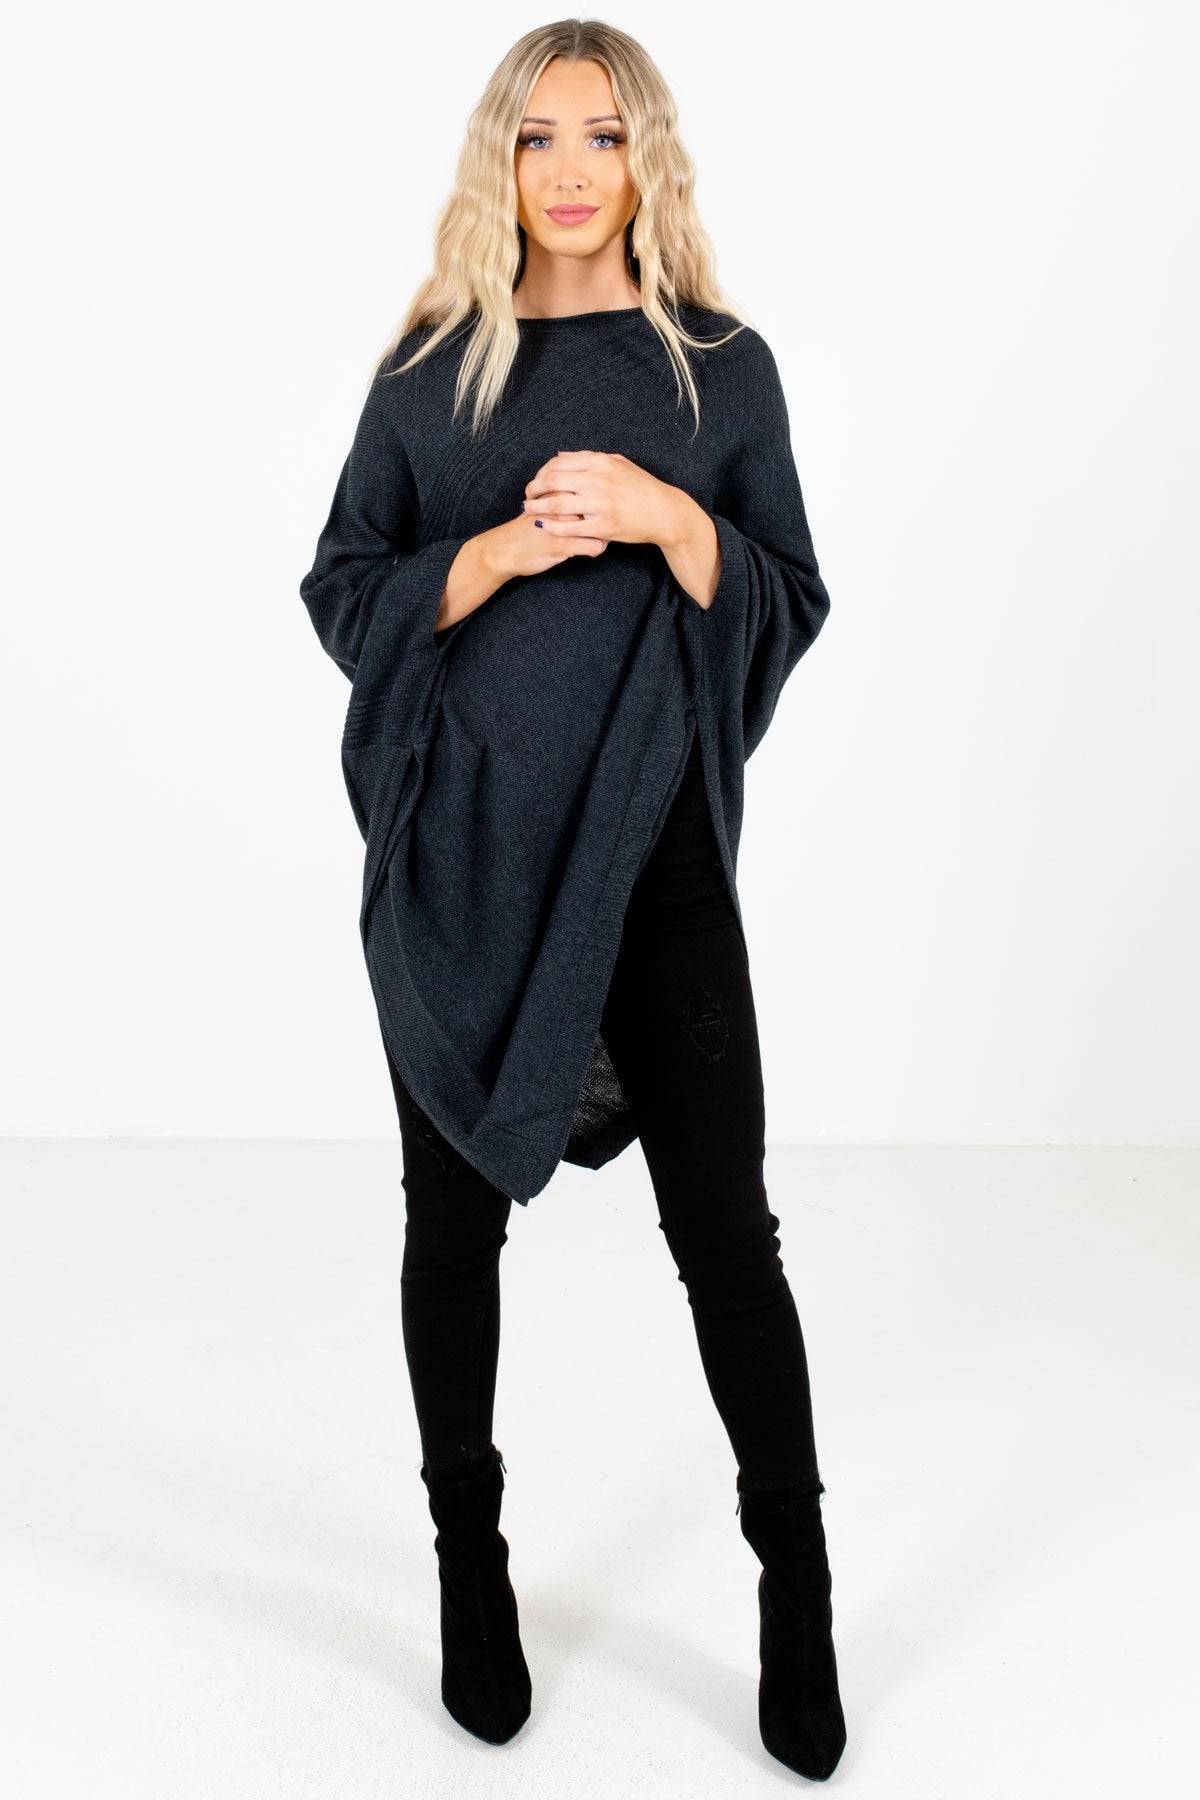 Women's Charcoal Gray Fall and Winter Boutique Clothing